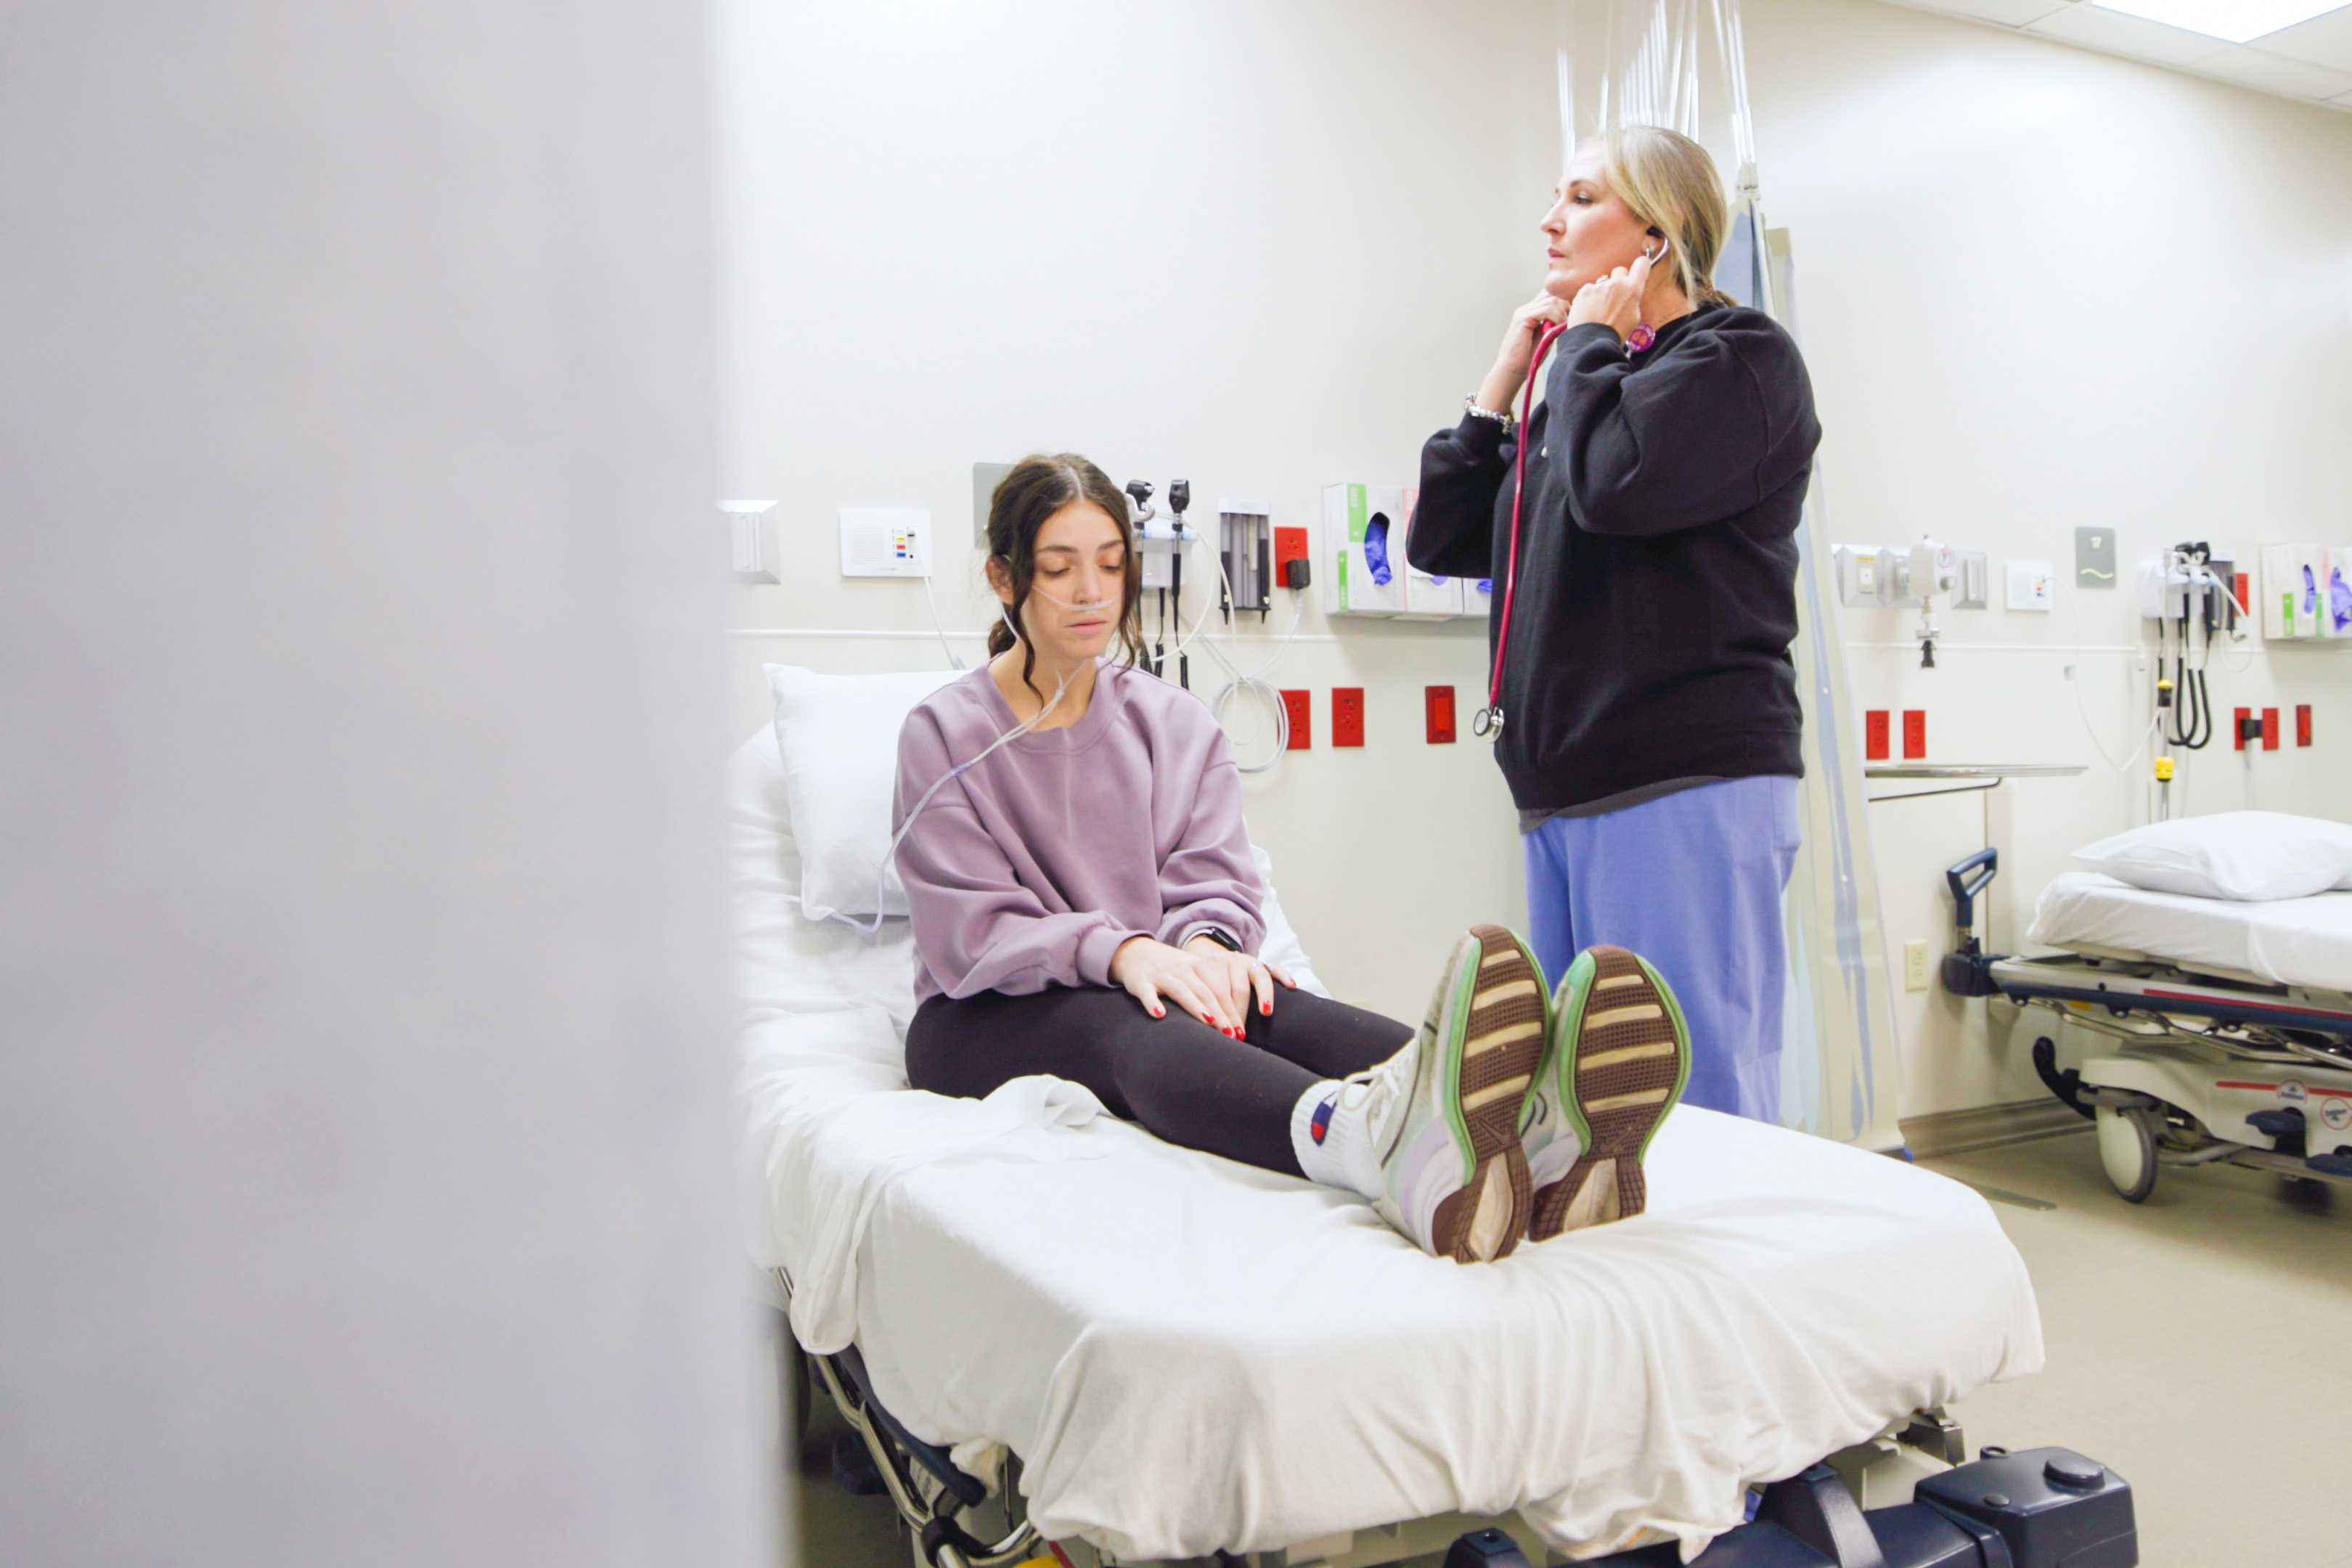 student practicing using a stethoscope on a patient sitting on a hospital bed